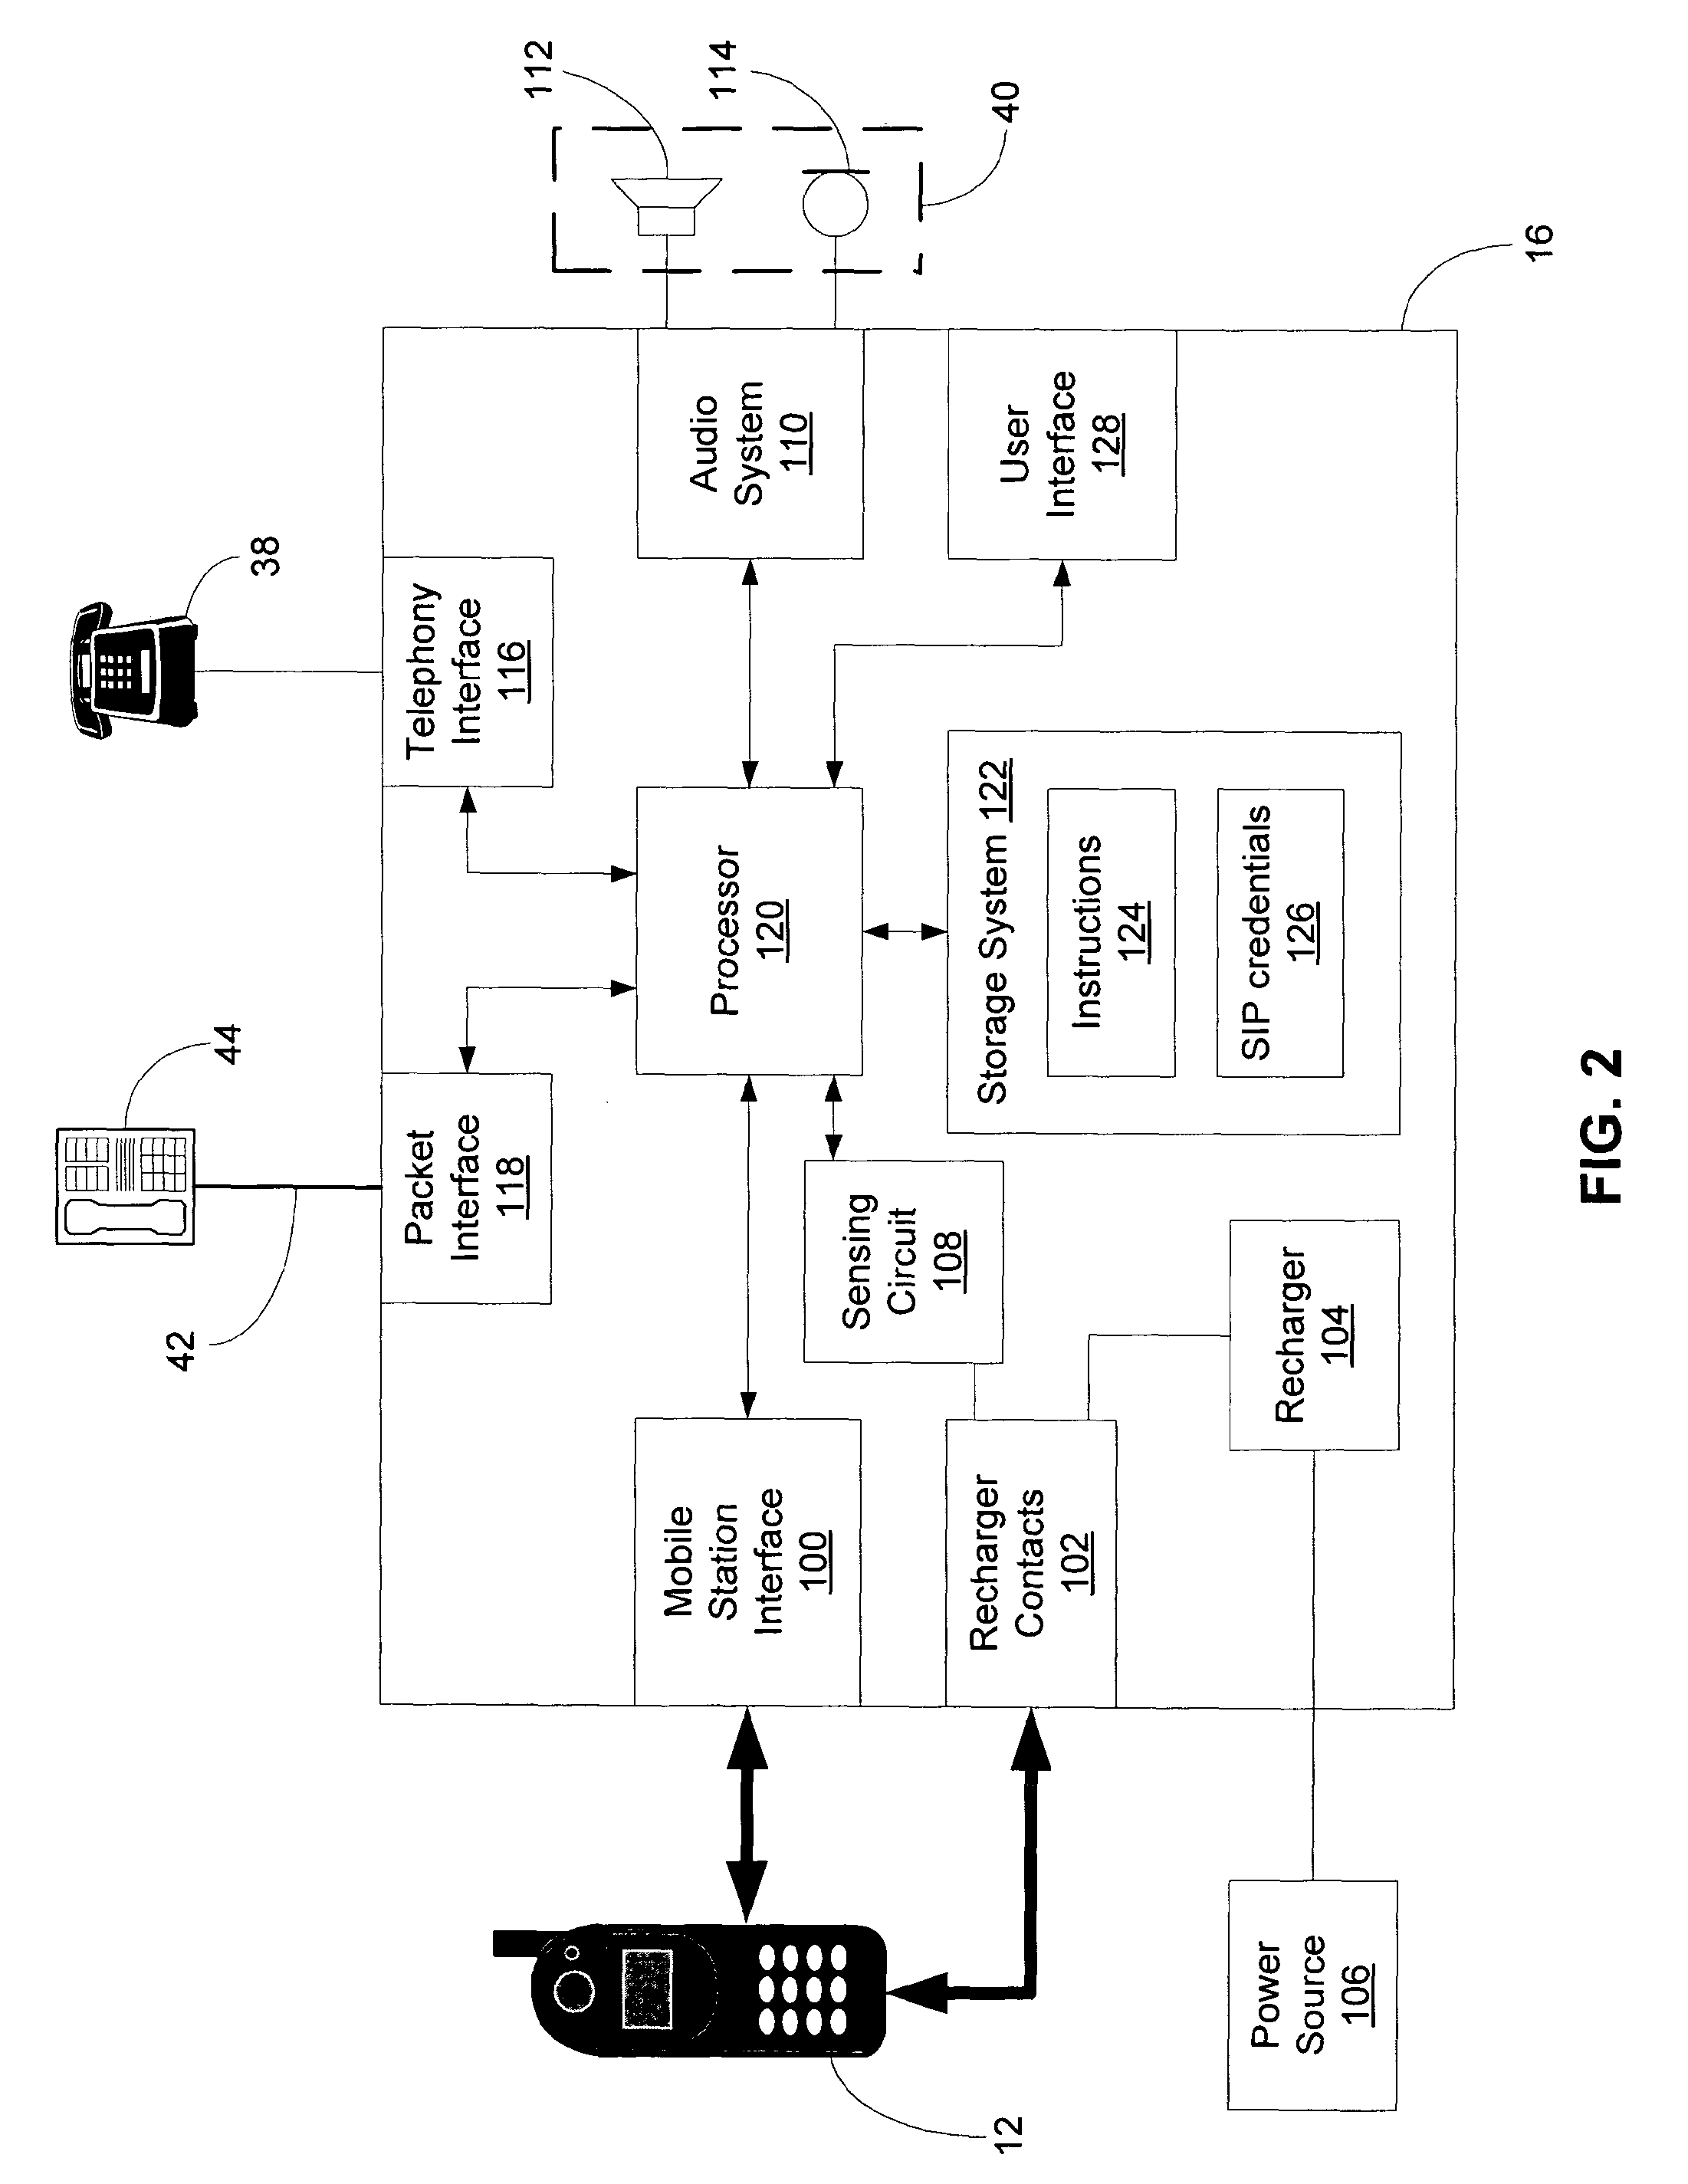 Method and System for Extending a Mobile Directory Number to a Landline-Based Voice-Over-Packet Network